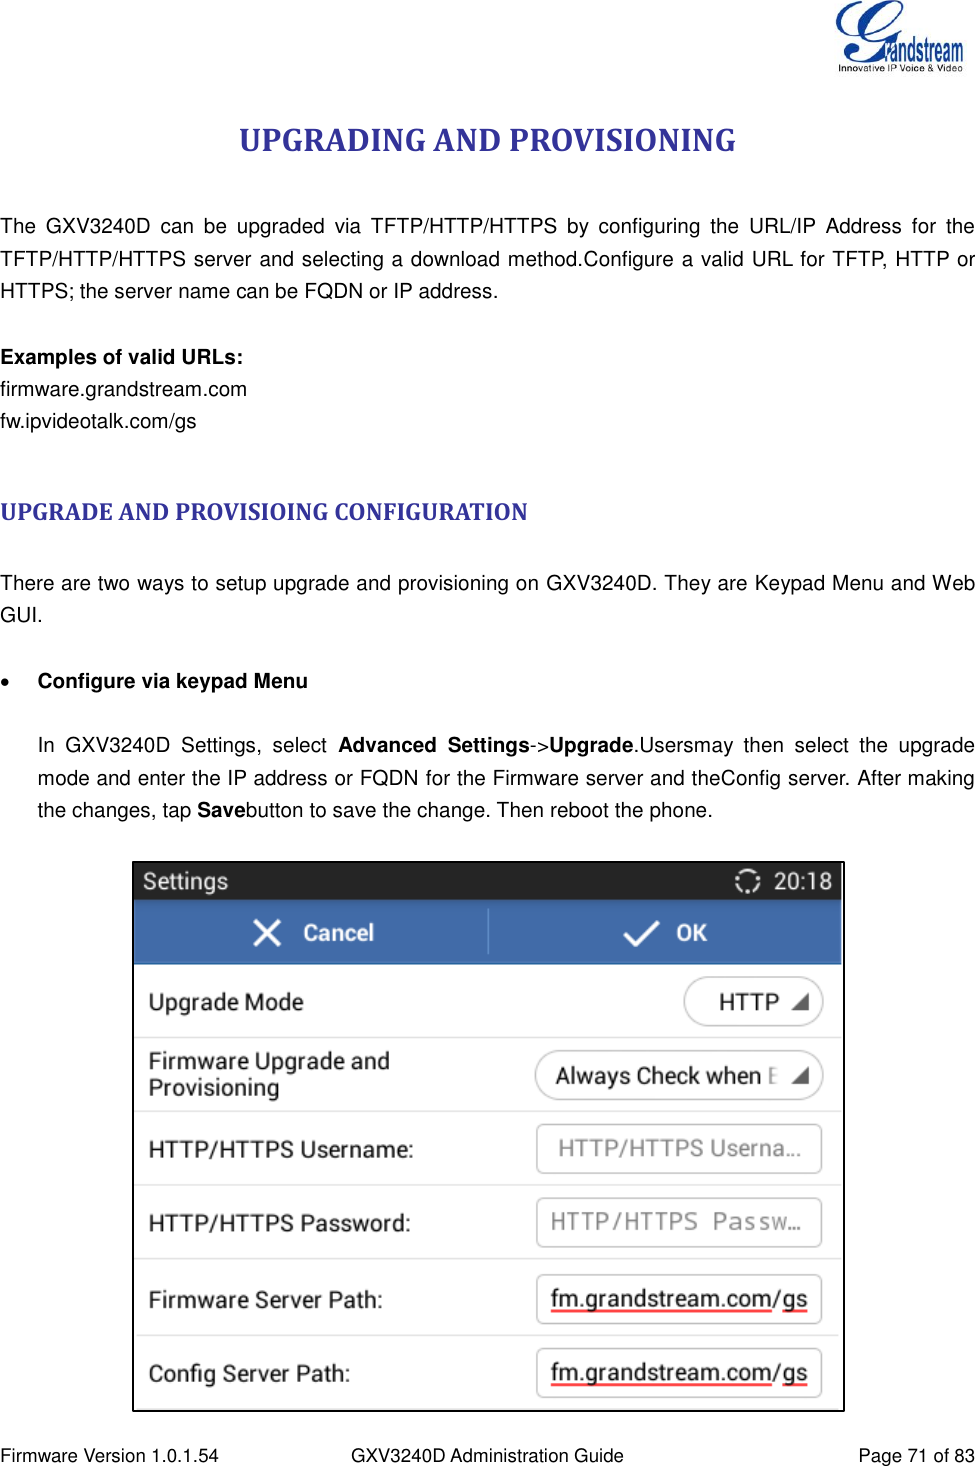  Firmware Version 1.0.1.54 GXV3240D Administration Guide Page 71 of 83  UPGRADING AND PROVISIONING  The  GXV3240D  can  be  upgraded  via  TFTP/HTTP/HTTPS  by  configuring  the  URL/IP  Address  for  the TFTP/HTTP/HTTPS server and selecting a download method.Configure a valid URL for TFTP, HTTP or HTTPS; the server name can be FQDN or IP address.  Examples of valid URLs: firmware.grandstream.com fw.ipvideotalk.com/gs  UPGRADE AND PROVISIOING CONFIGURATION  There are two ways to setup upgrade and provisioning on GXV3240D. They are Keypad Menu and Web GUI.   Configure via keypad Menu   In  GXV3240D  Settings,  select  Advanced  Settings-&gt;Upgrade.Usersmay  then  select  the  upgrade mode and enter the IP address or FQDN for the Firmware server and theConfig server. After making the changes, tap Savebutton to save the change. Then reboot the phone.   